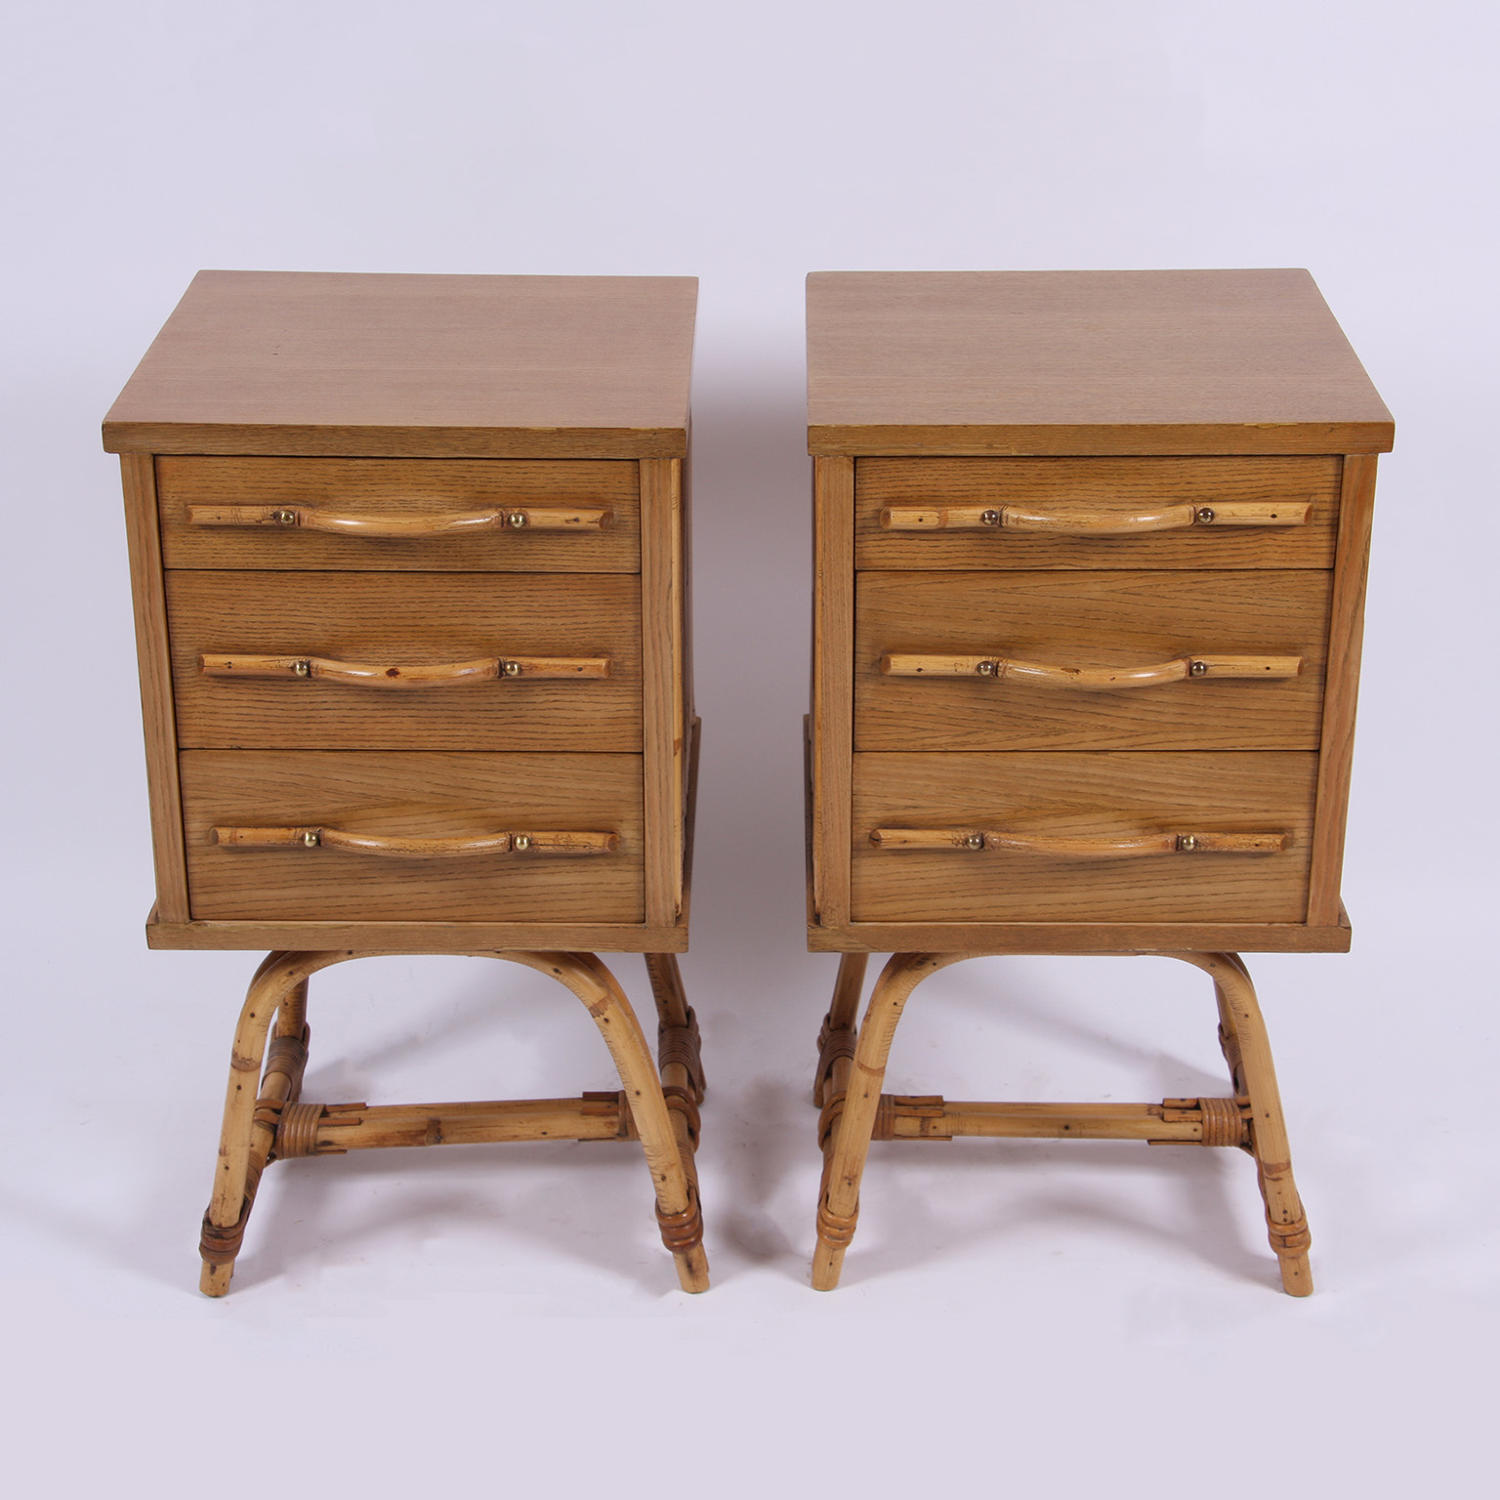 Pair of Bamboo Bedside Tables